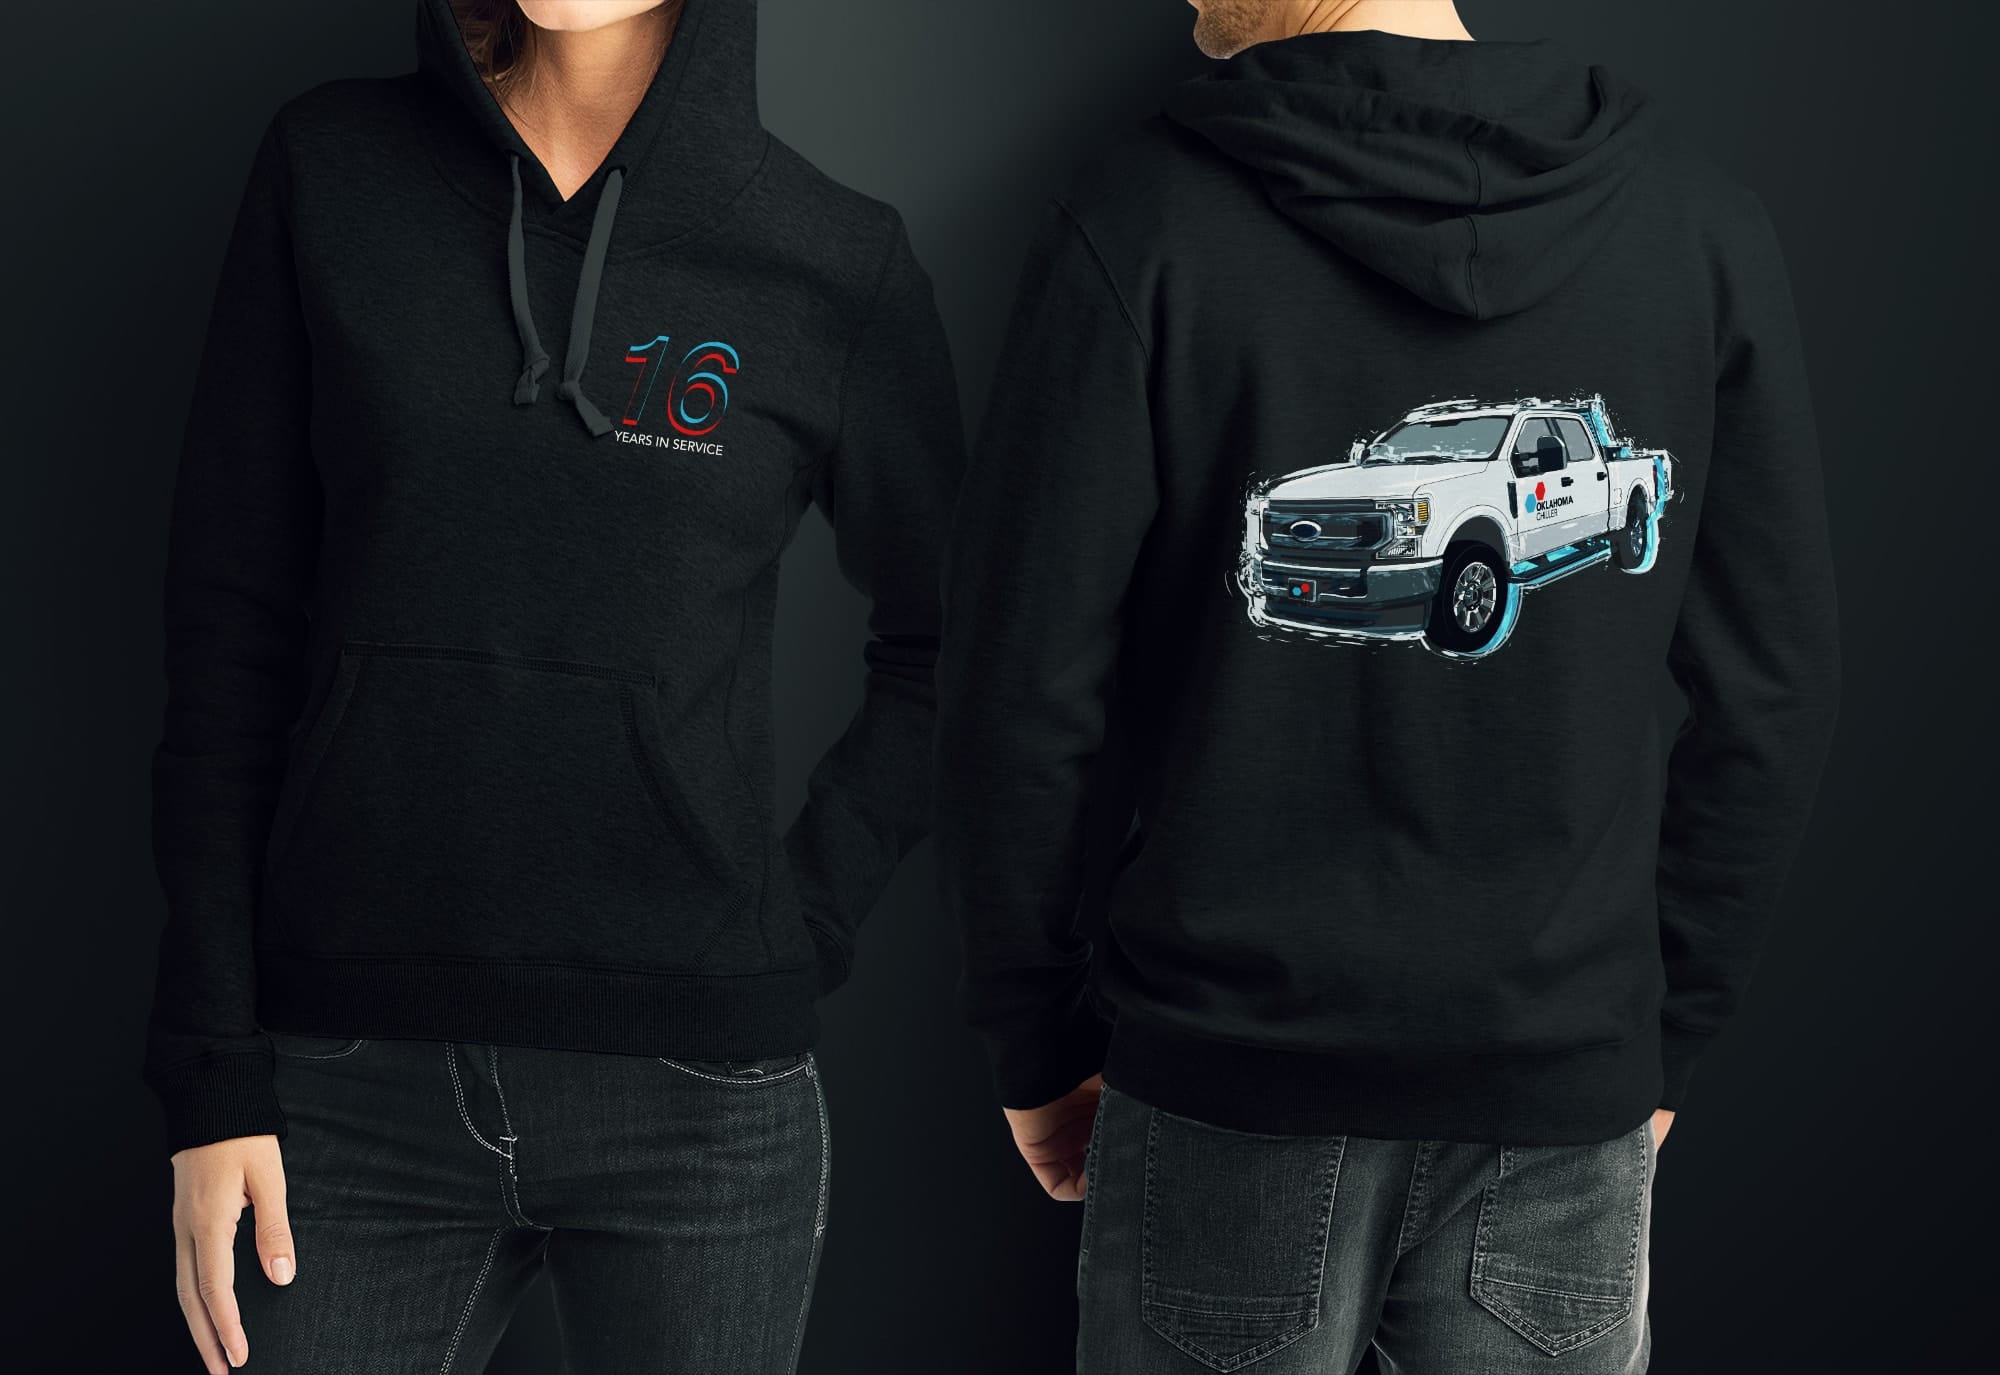 Anniversary Hoodie Design for an Oklahoma Air Conditioning Repair Service